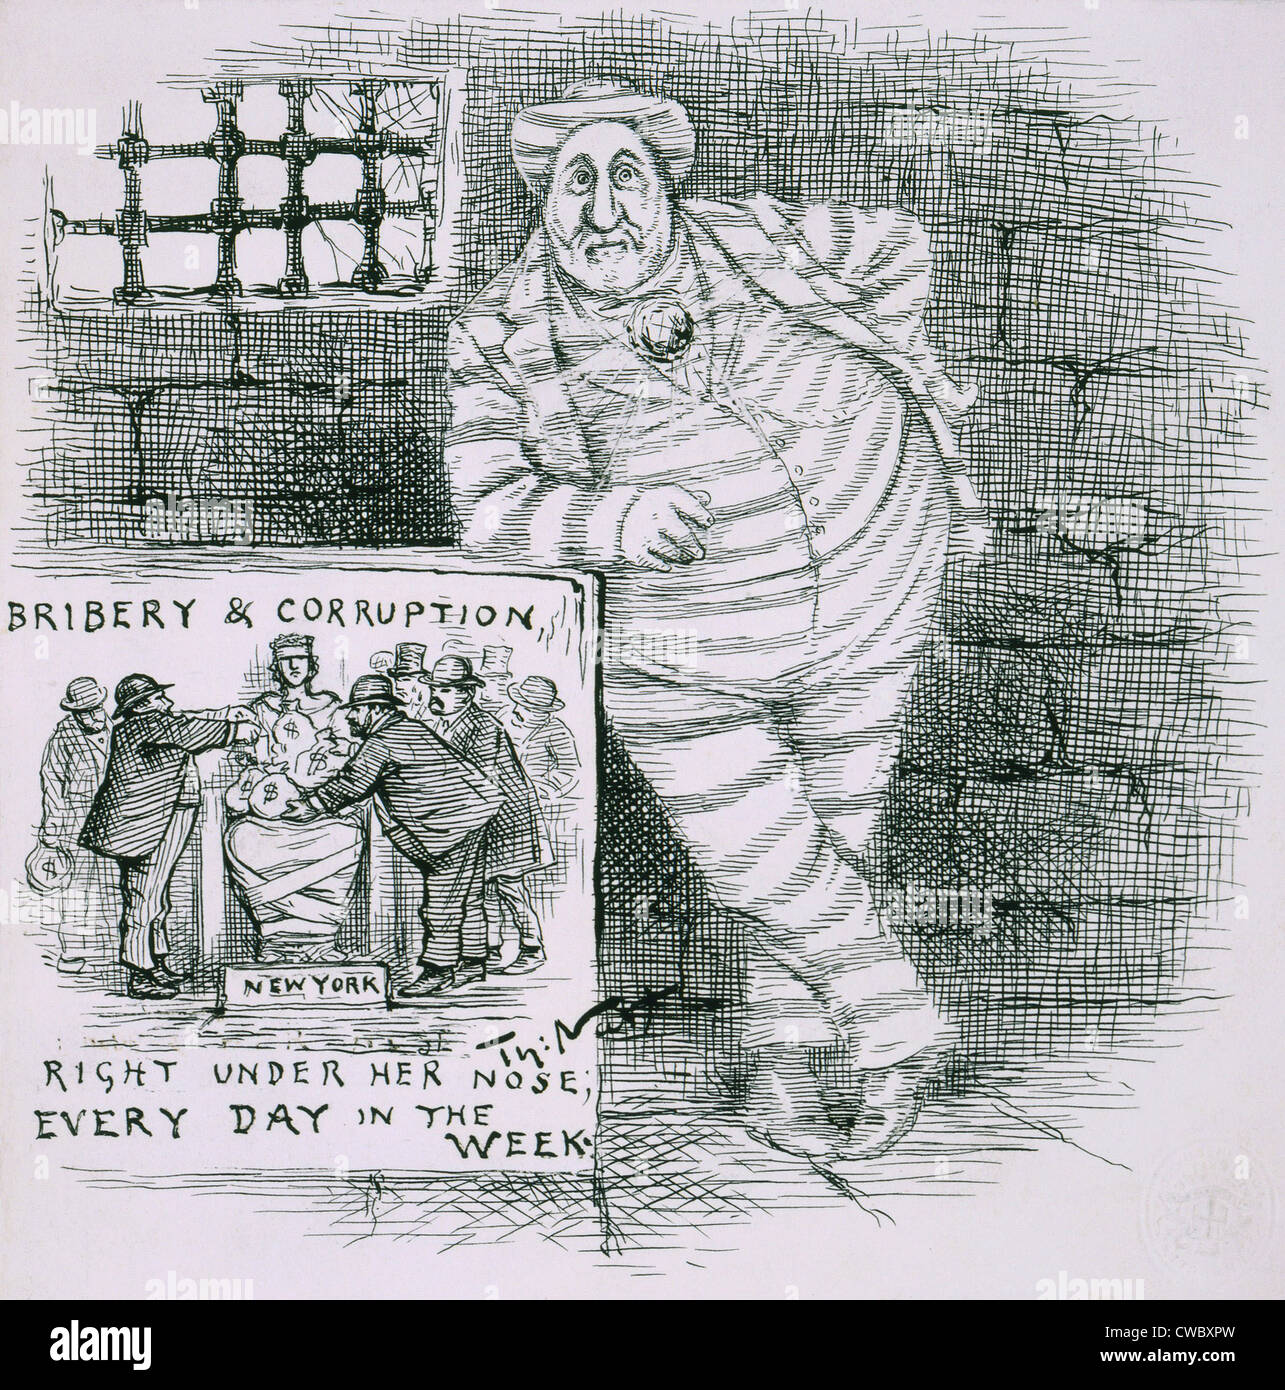 Thomas Nast reprised his favorite subject, Boss Tweed, eight years after his death in prison. As a diamond studded convict, Stock Photo